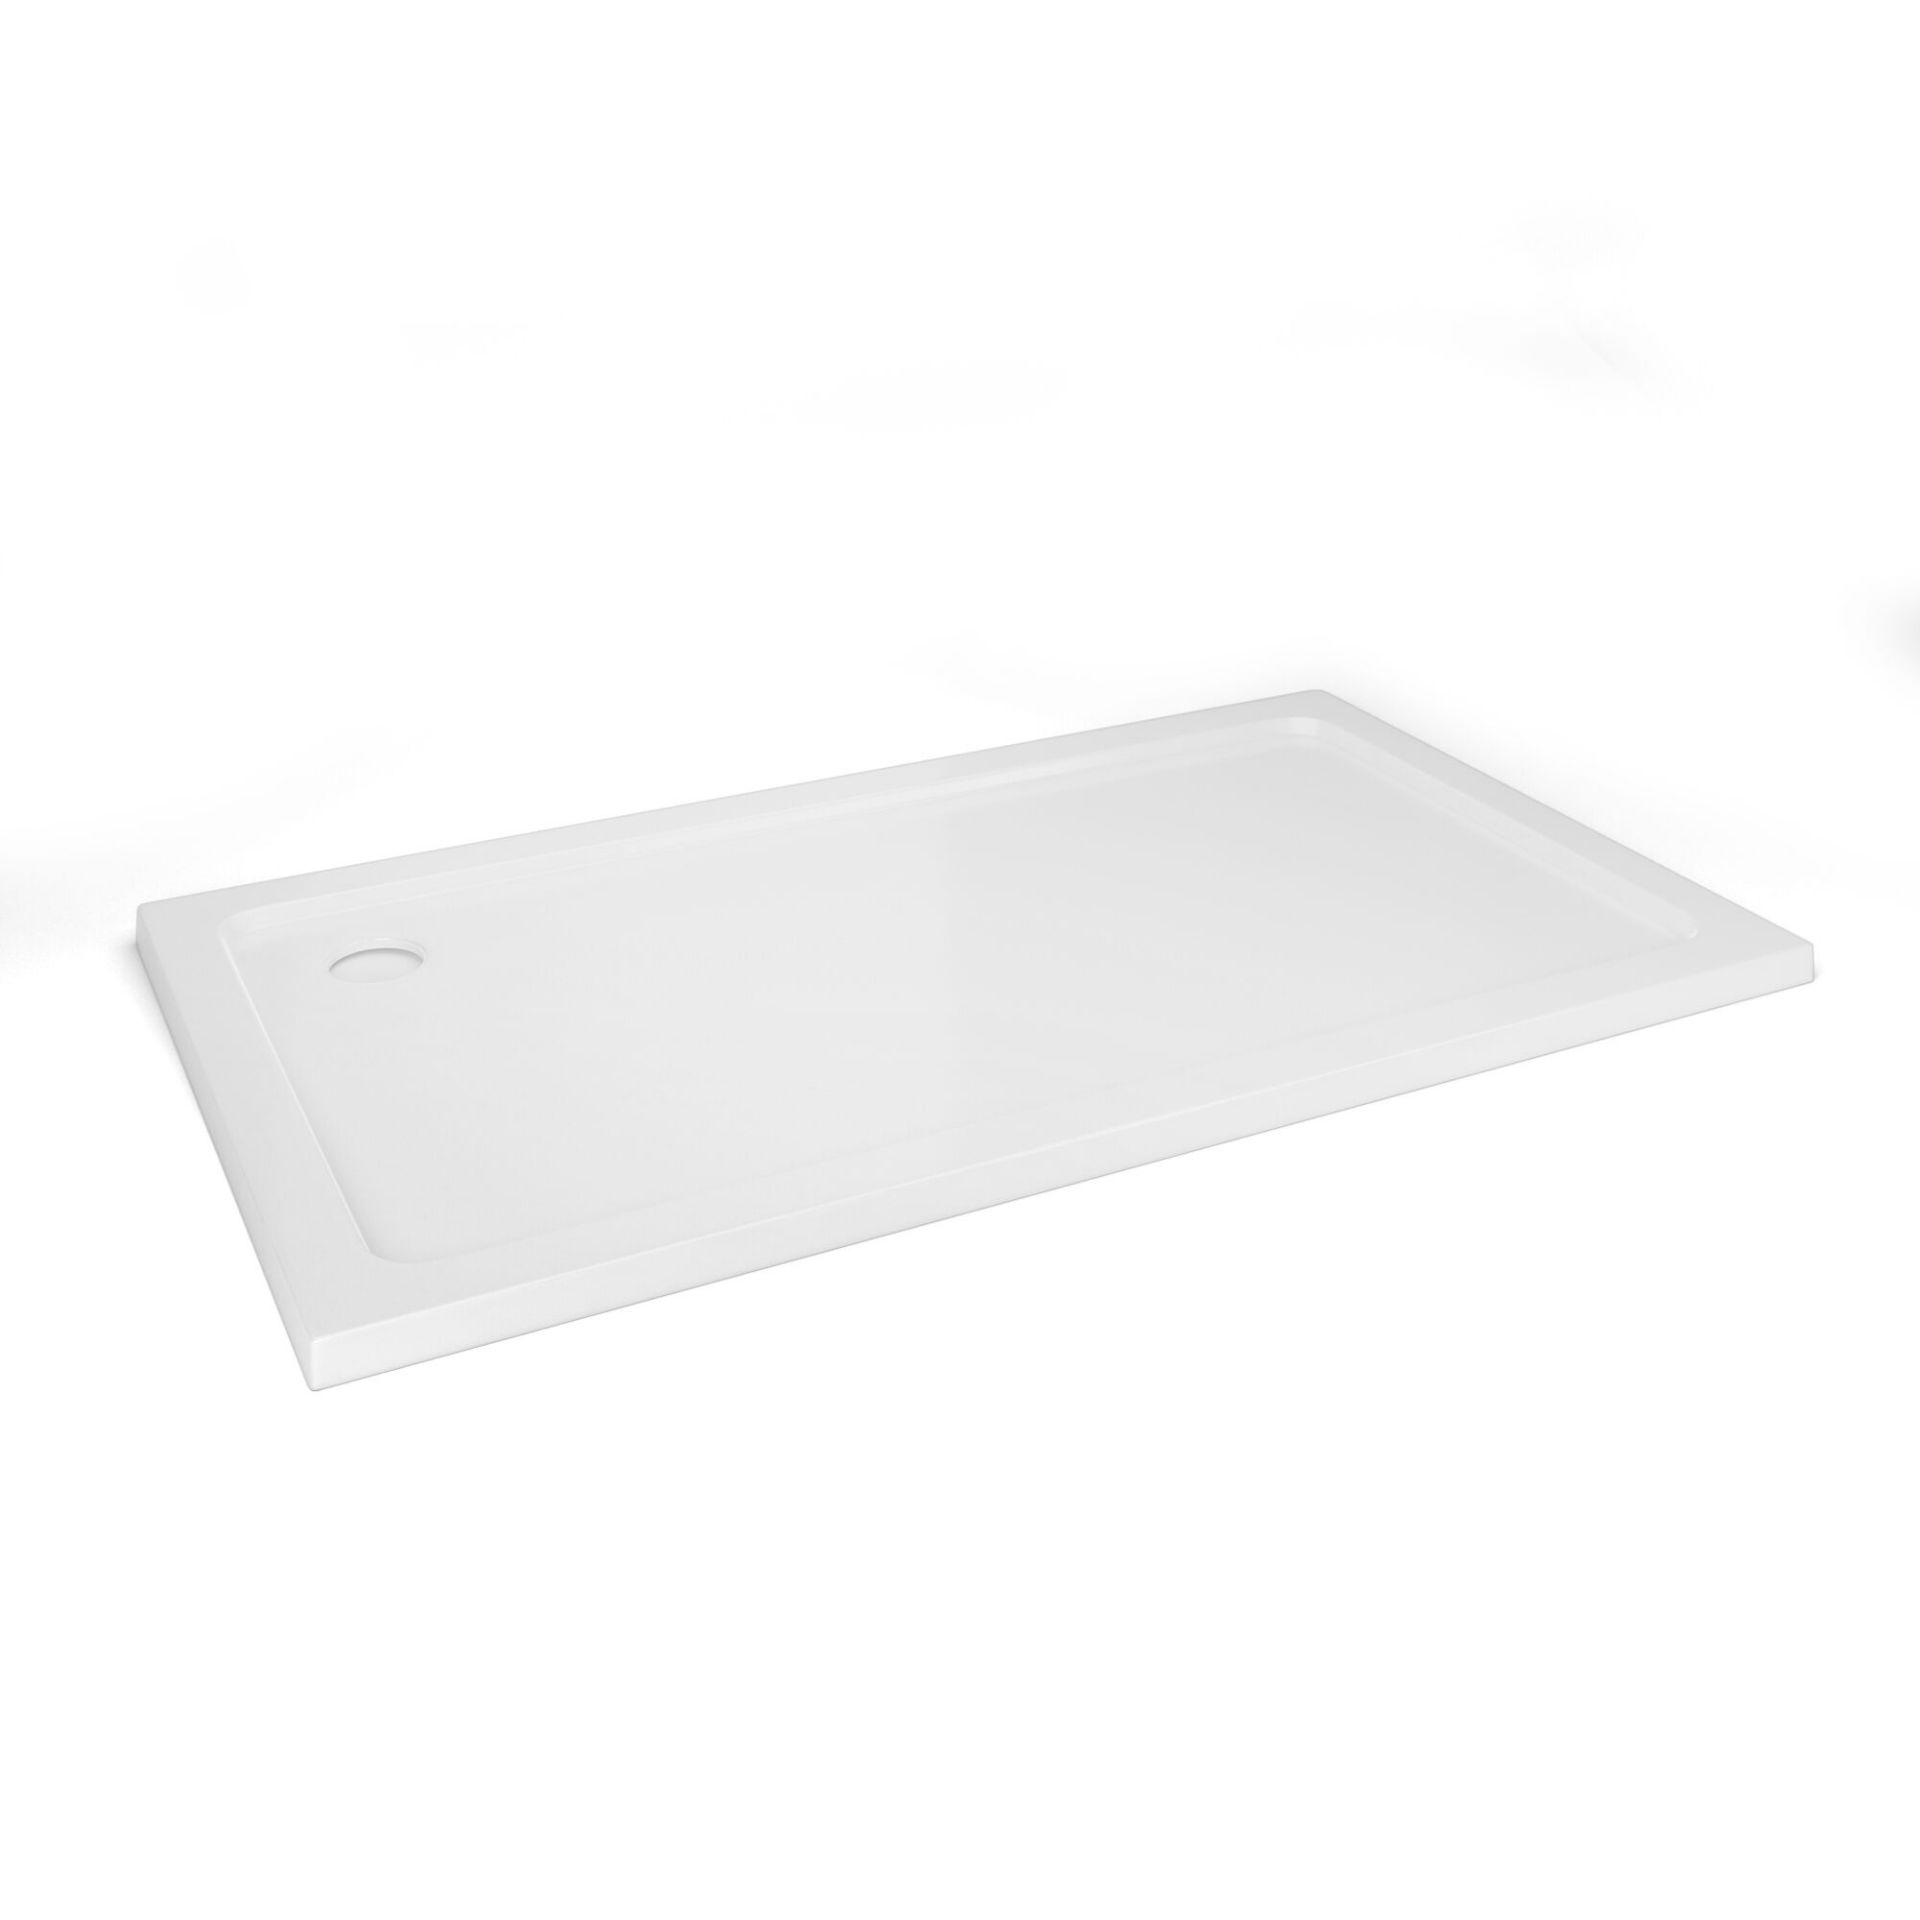 NEW (F88) 1300x800mm Rectangular Ultra Slim Stone Shower Tray. Constructed from acrylic capped ... - Image 2 of 2